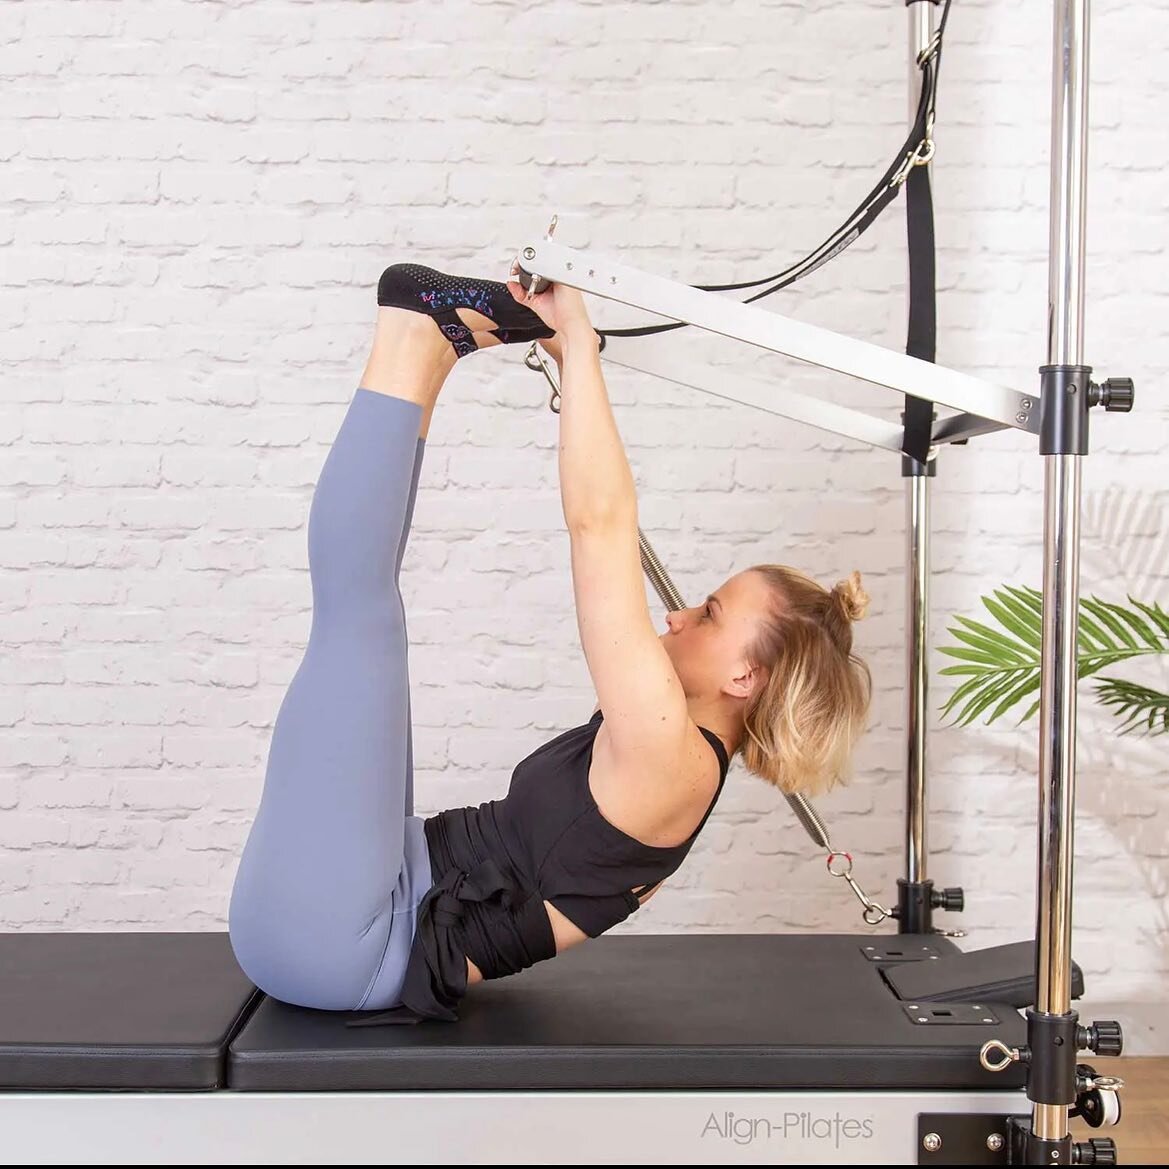 Come and visit us at our Welland showroom where you can test out the Align-Pilates range of reformers. Virtual showroom appointments also available. Book online via our profile